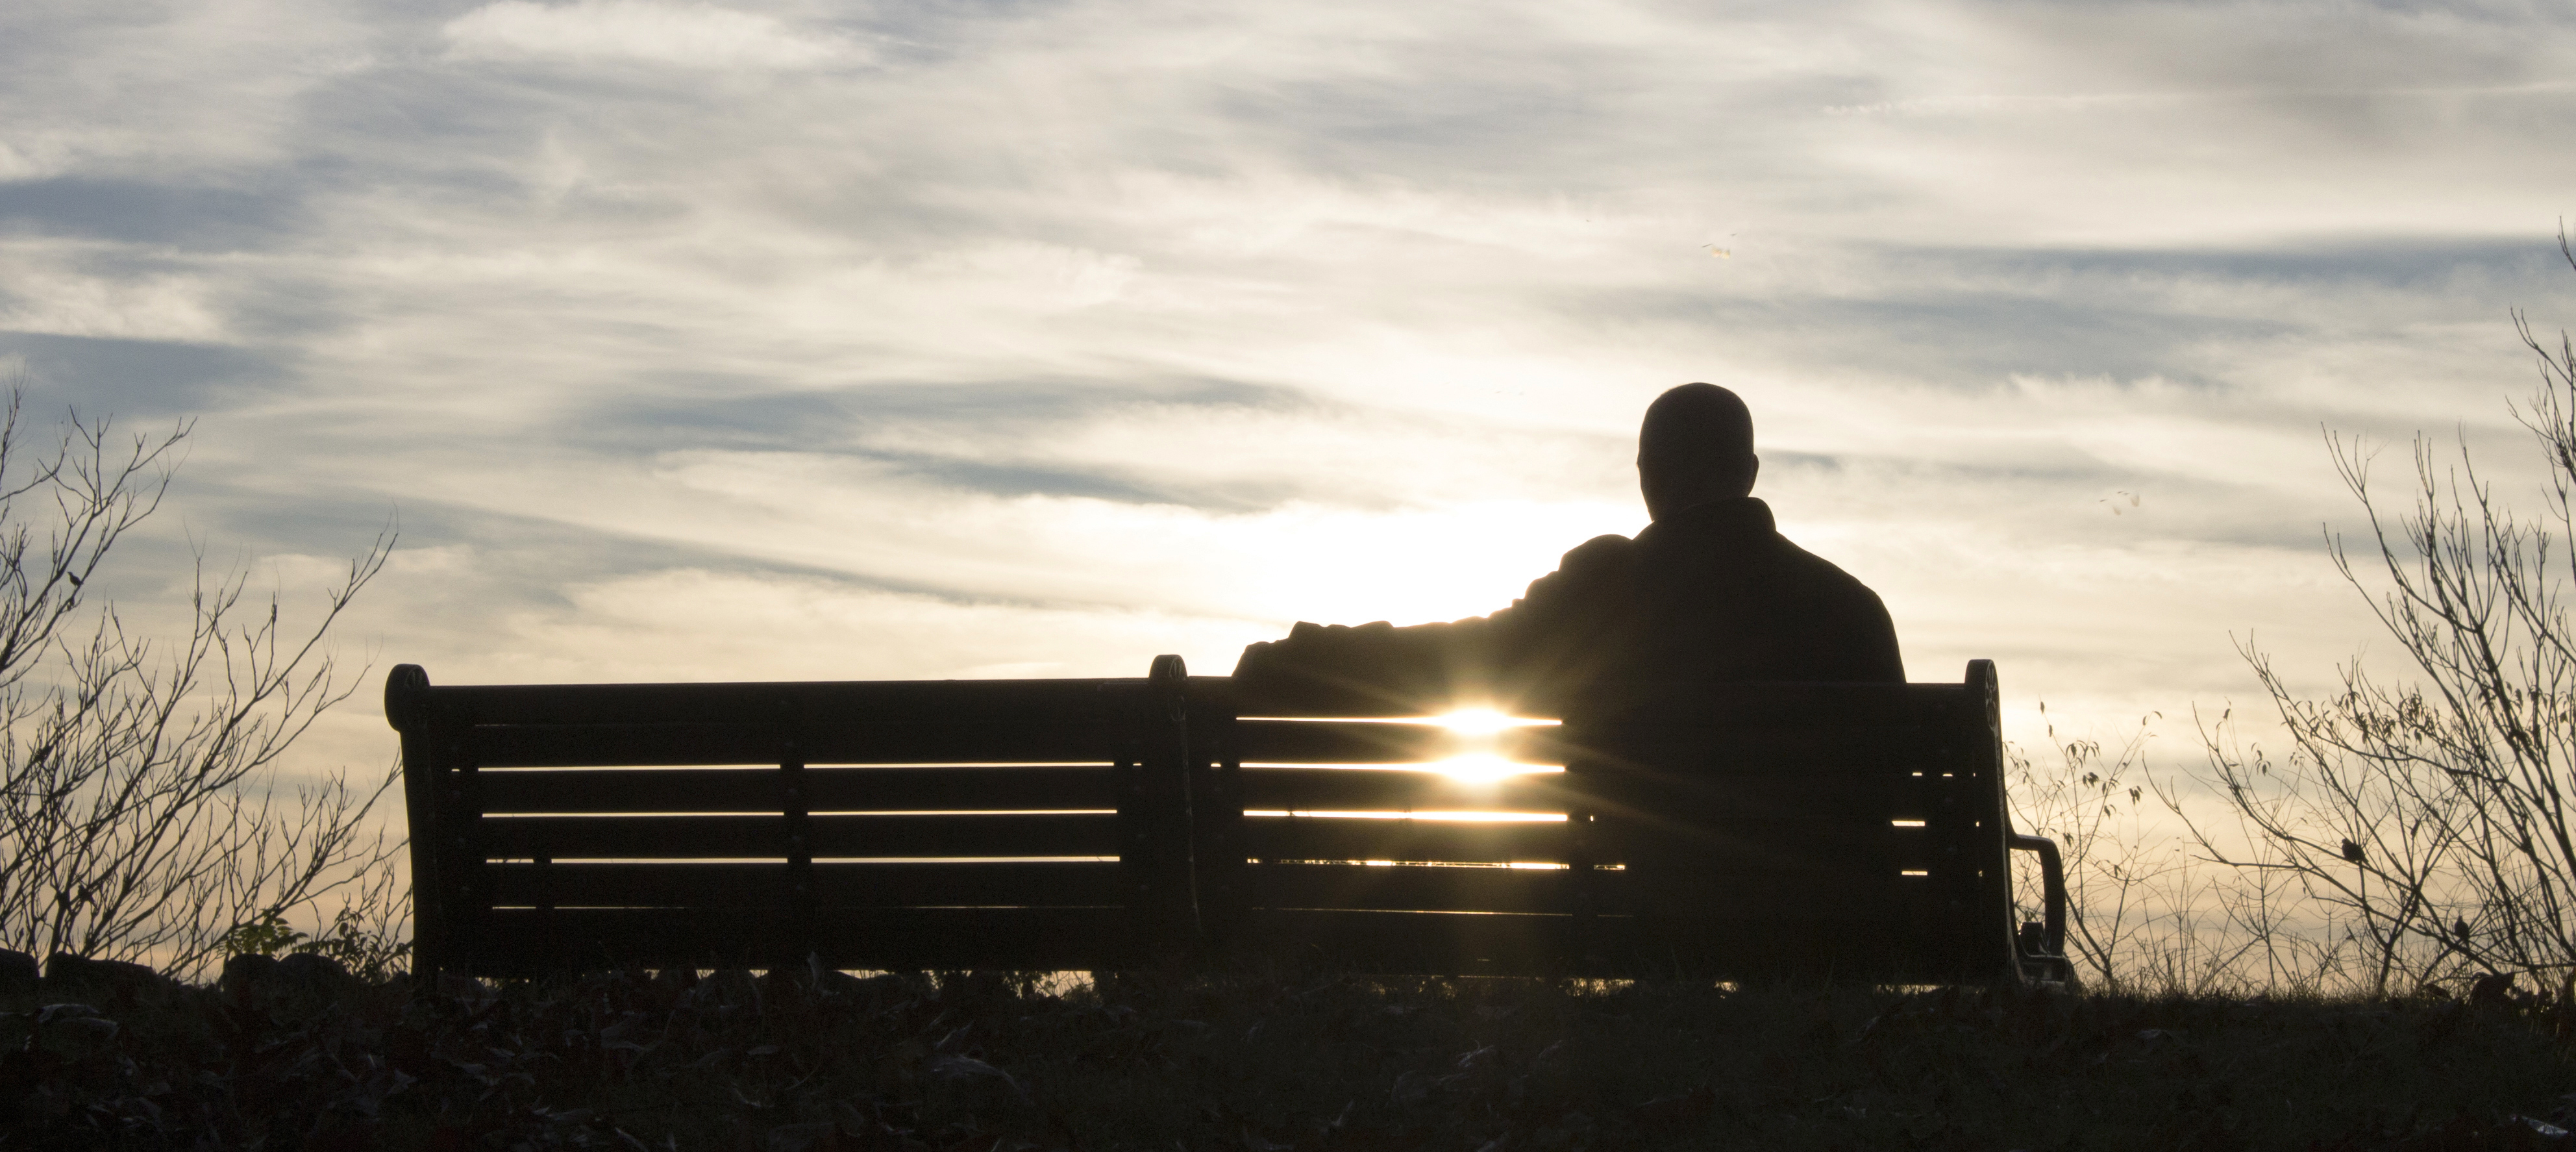 Sillouette of a man on a park bench